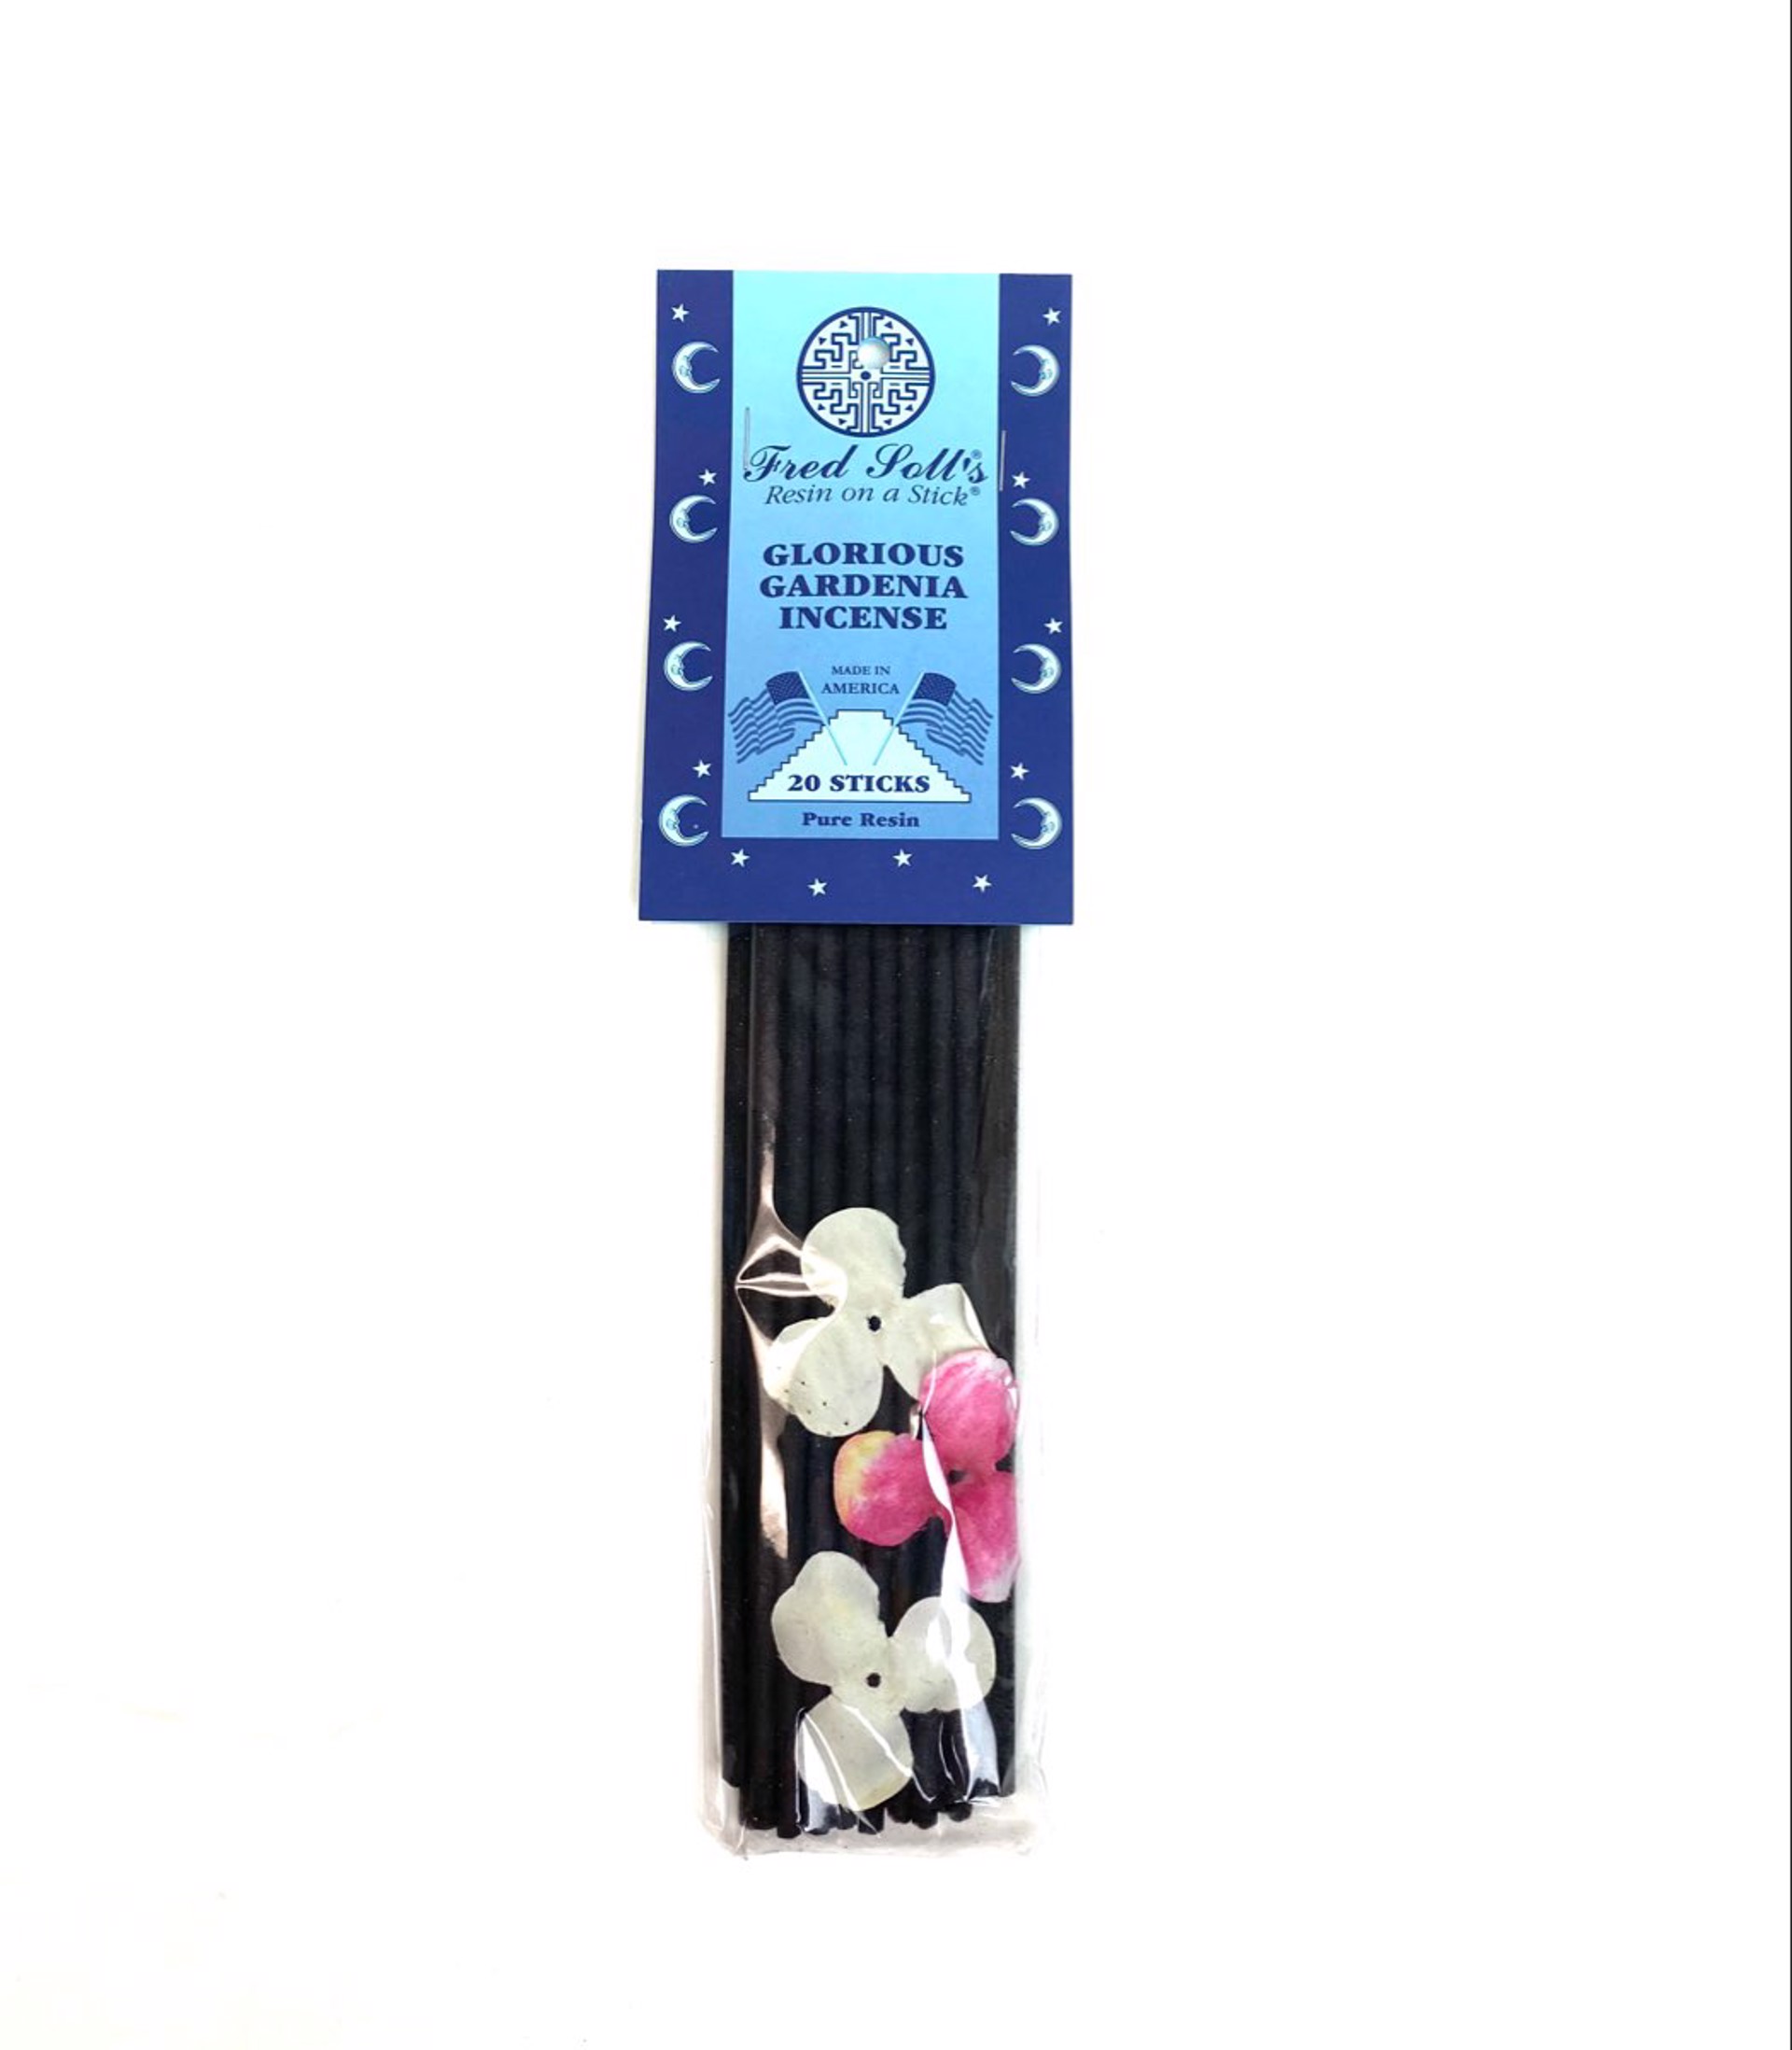 Glorious Gardenia Incense by Fred Soll Incense